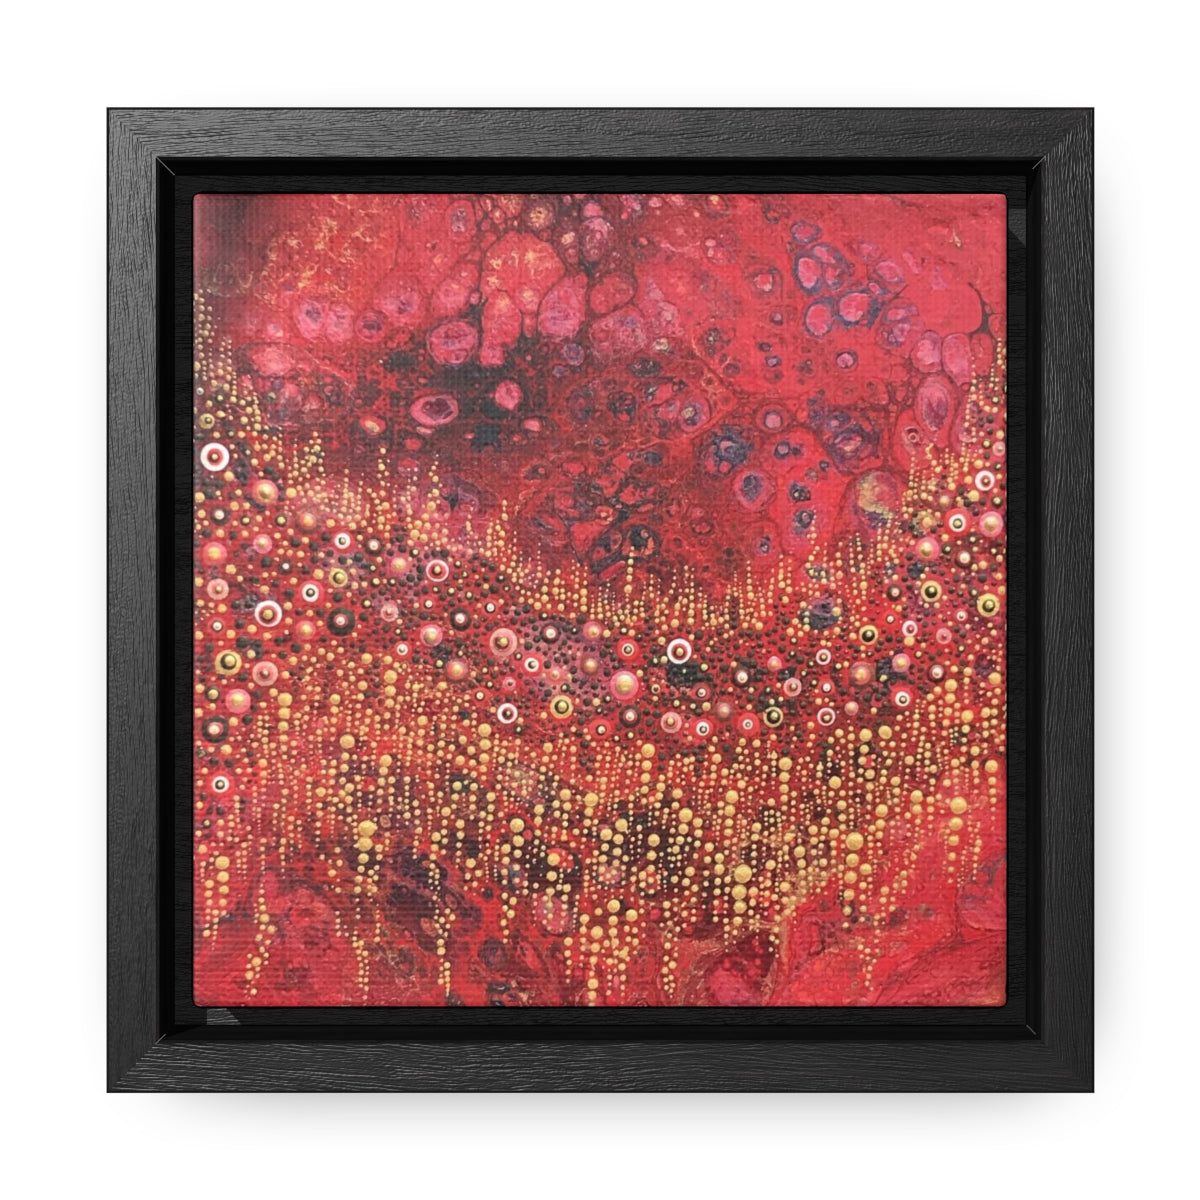 One More Red Nightmare Original Print Gallery Canvas Wraps, Square Frame